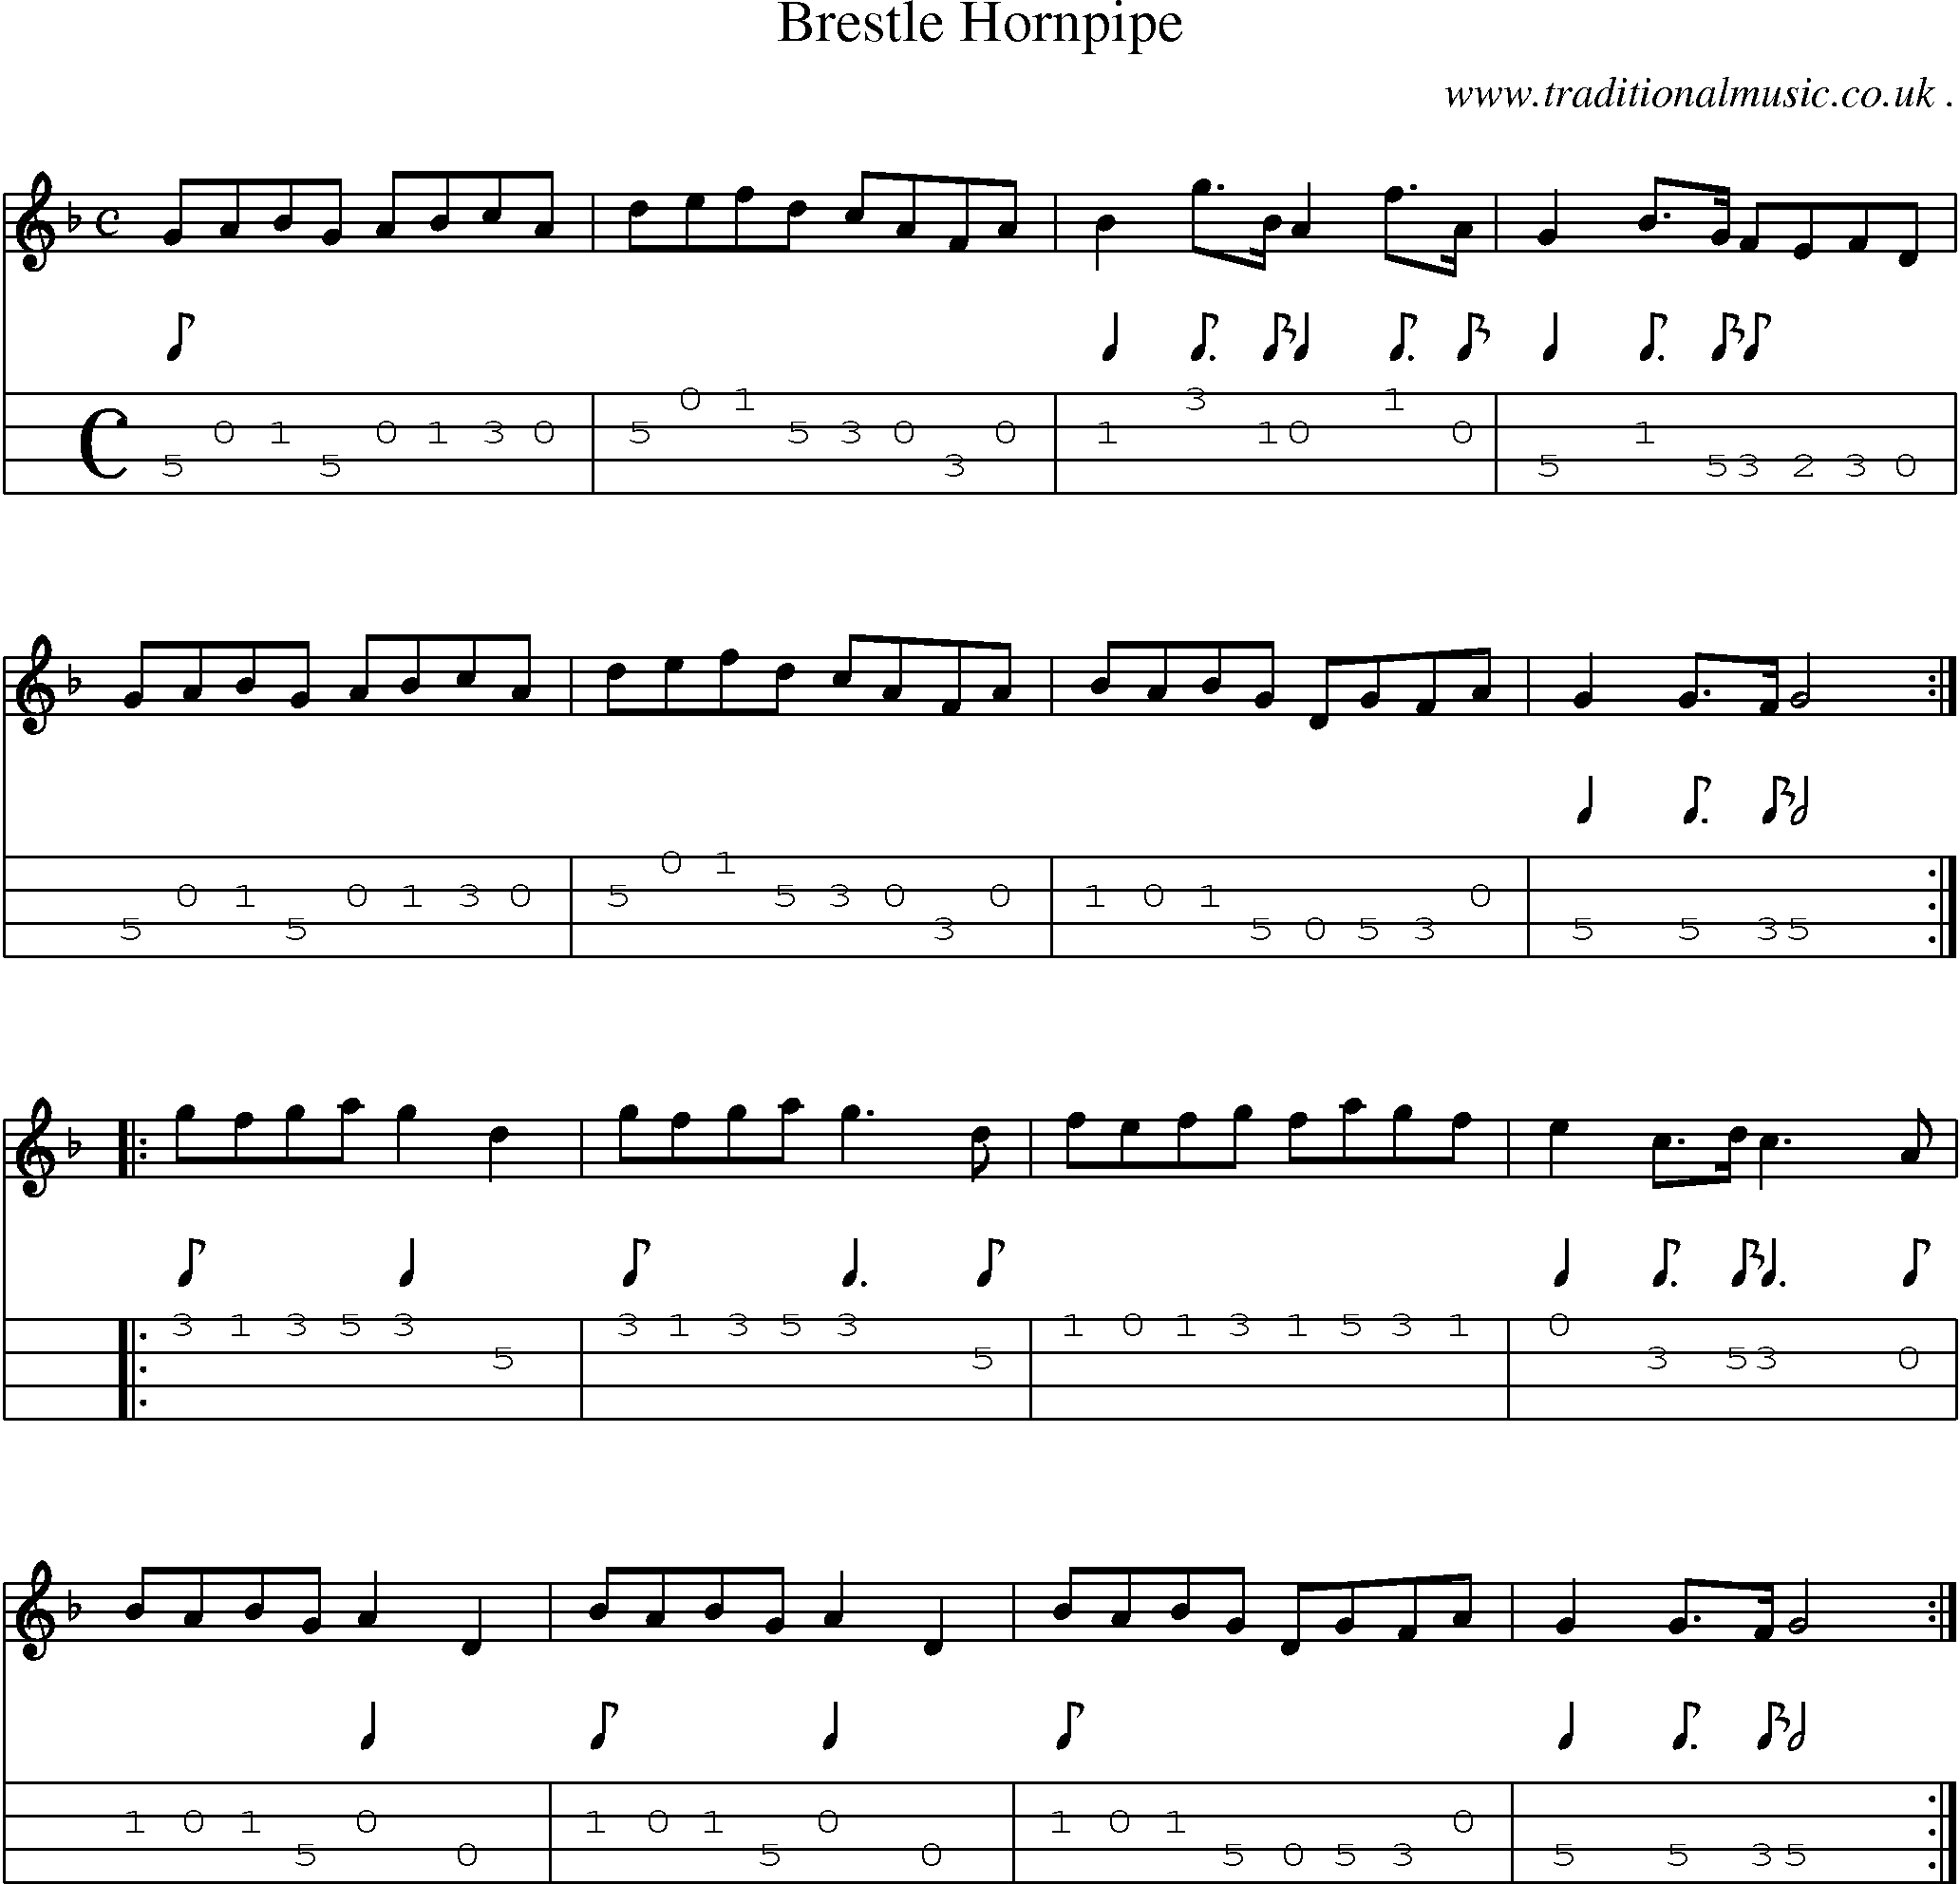 Sheet-Music and Mandolin Tabs for Brestle Hornpipe